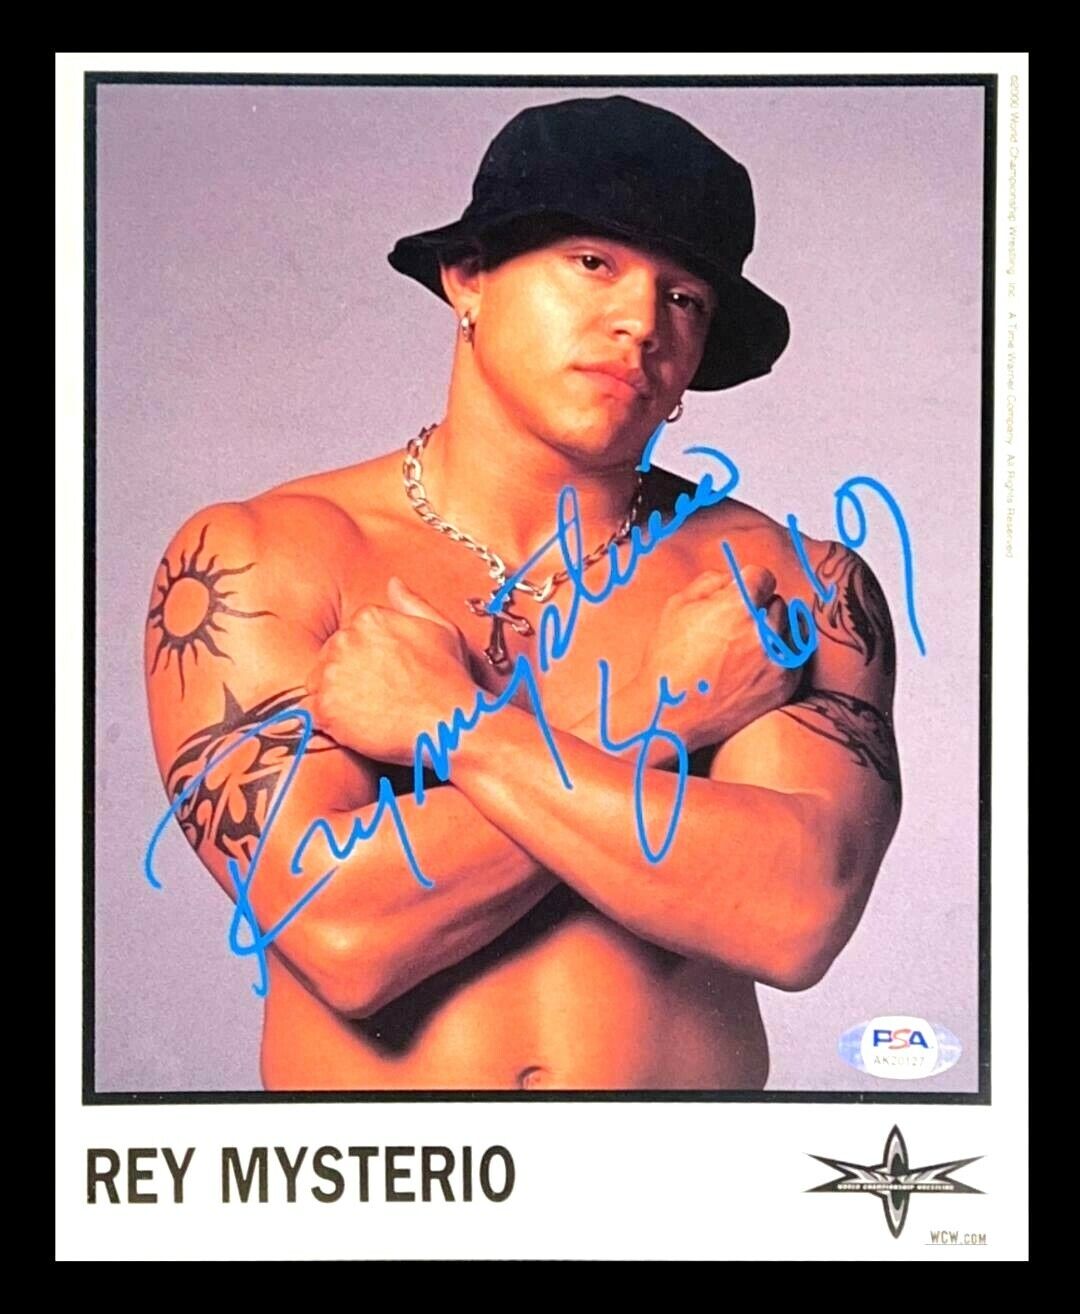 WWE WCW REY MYSTERIO JR HAND SIGNED AUTOGRAPHED 8X10 PROMO Photo Poster painting WITH PSA COA